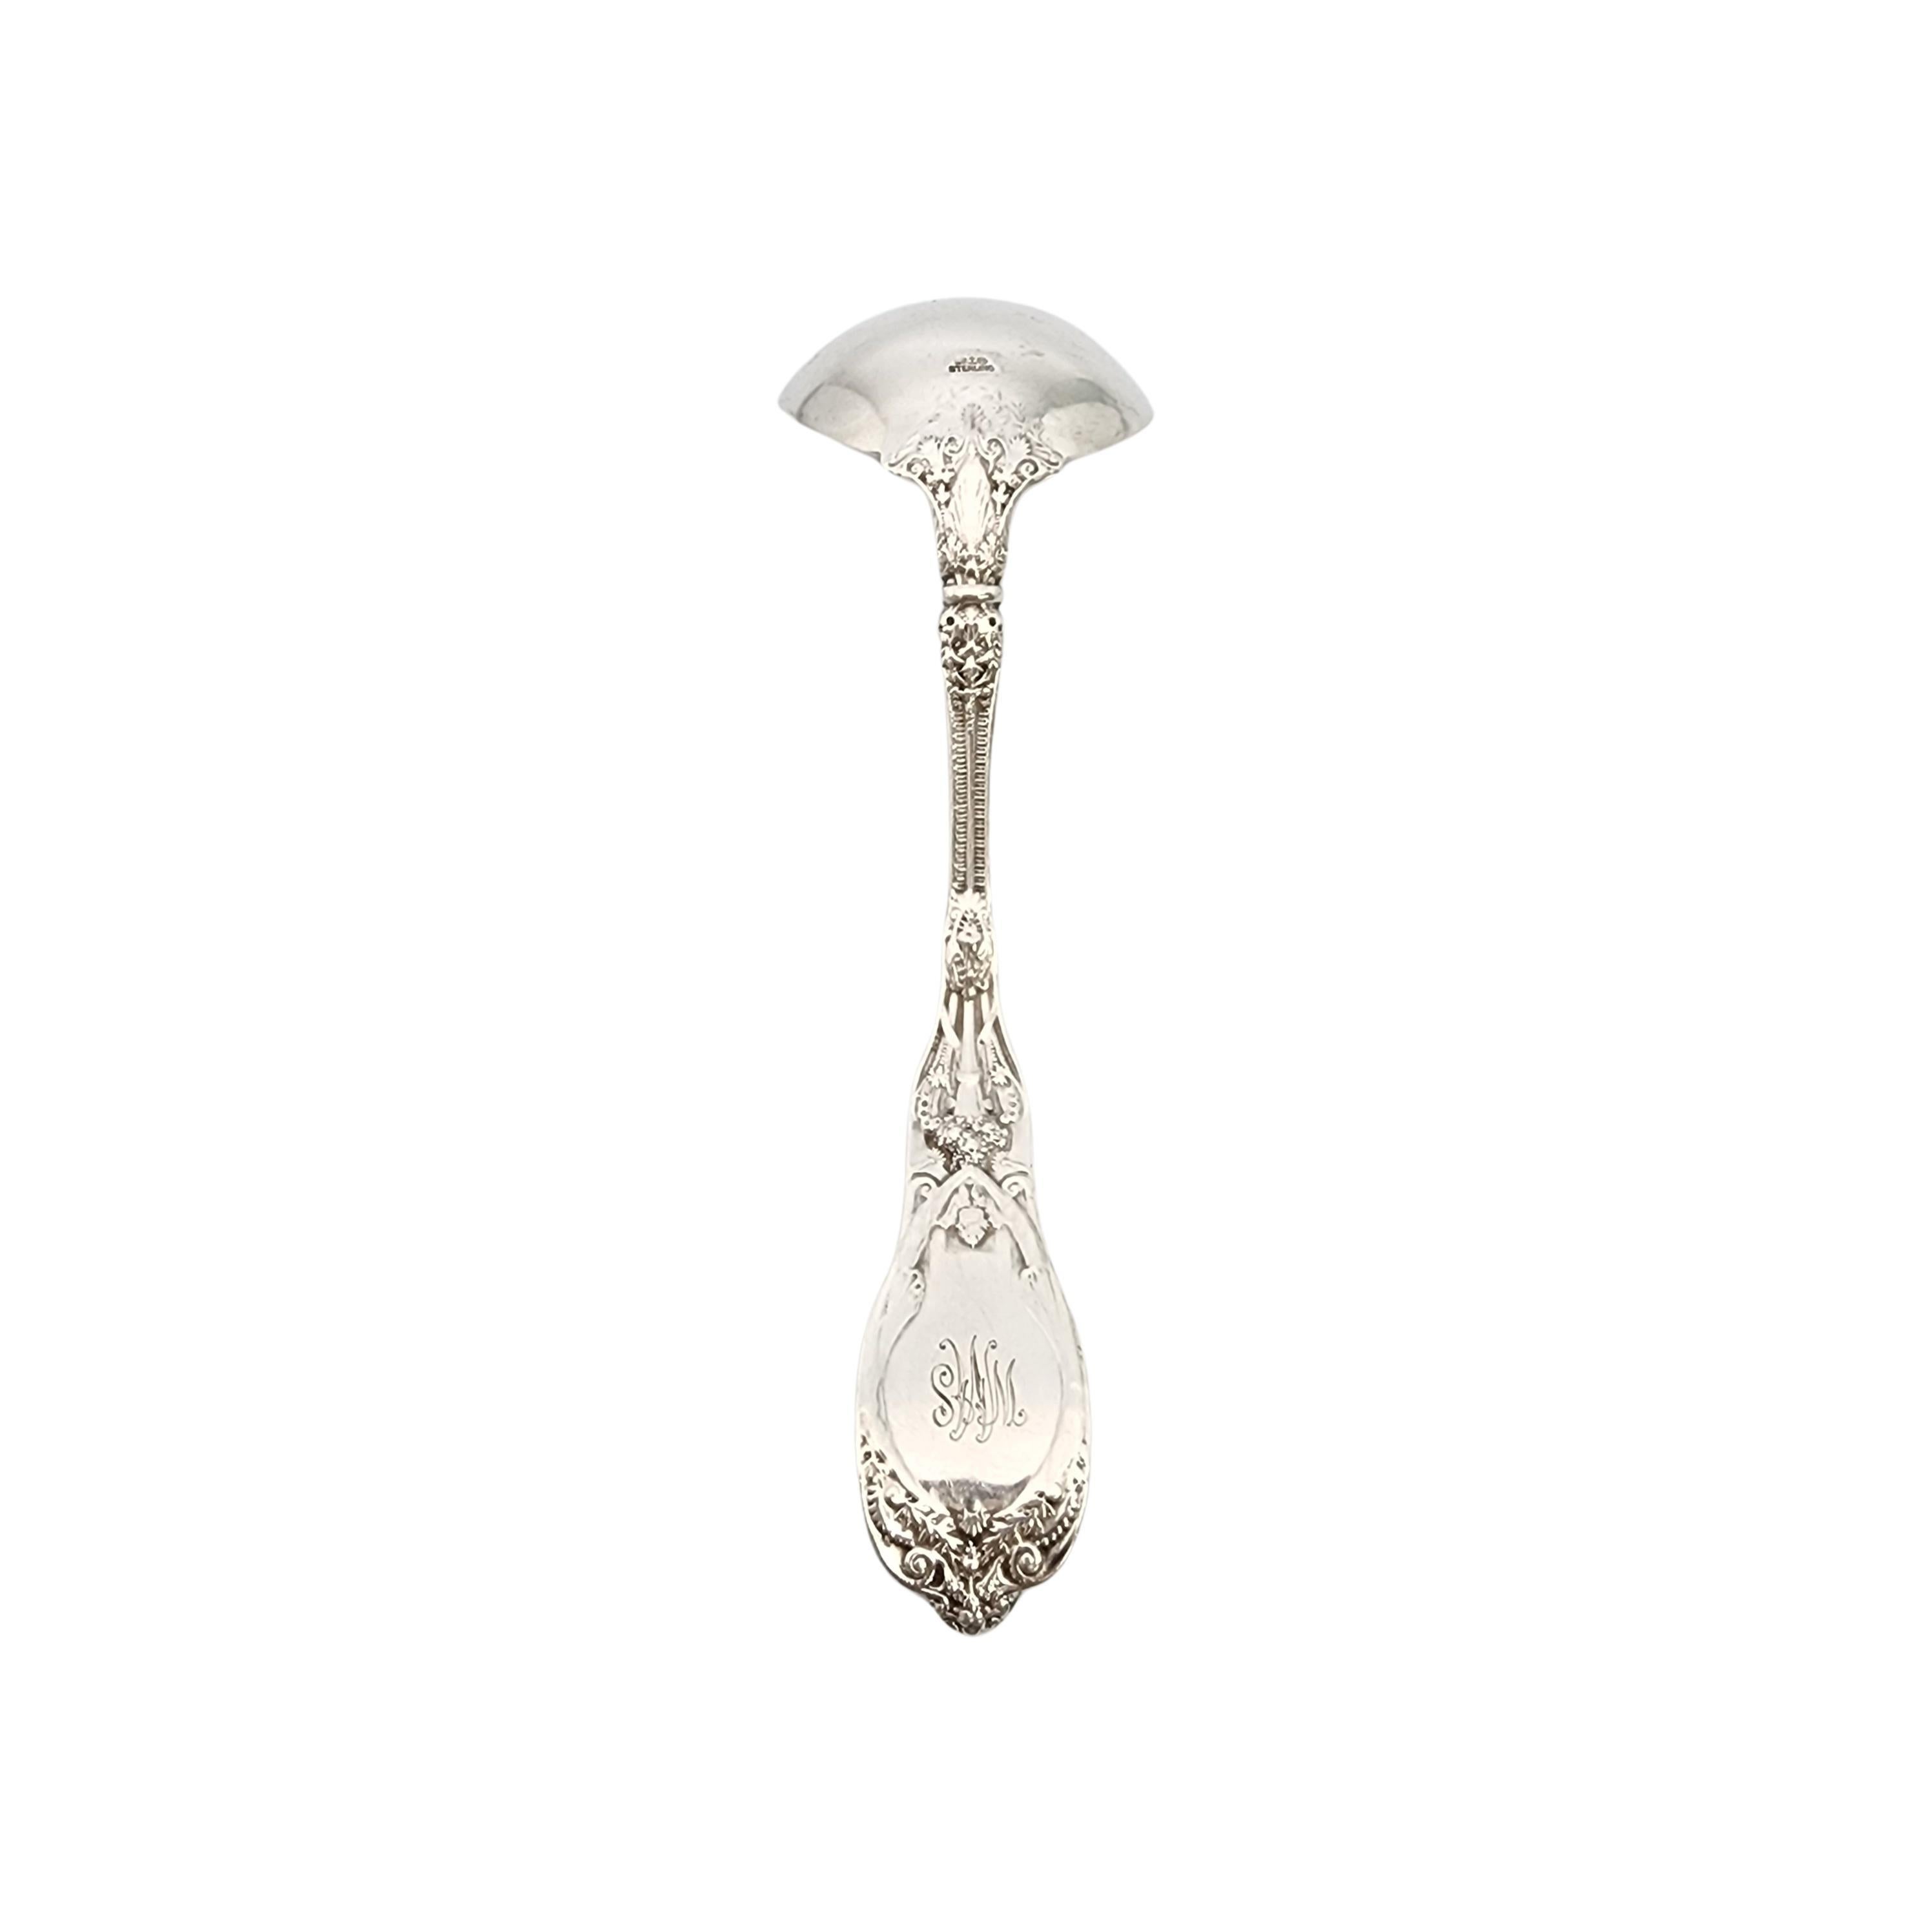 Antique sterling silver cream ladle in the Mythologique pattern by Gorham.

Monogram appears to be WMS (see photo).

Designed by F. Antoine Heller in 1894, Gorham's Mythologique pattern is an intricate, multi-motif pattern that ornately depicts